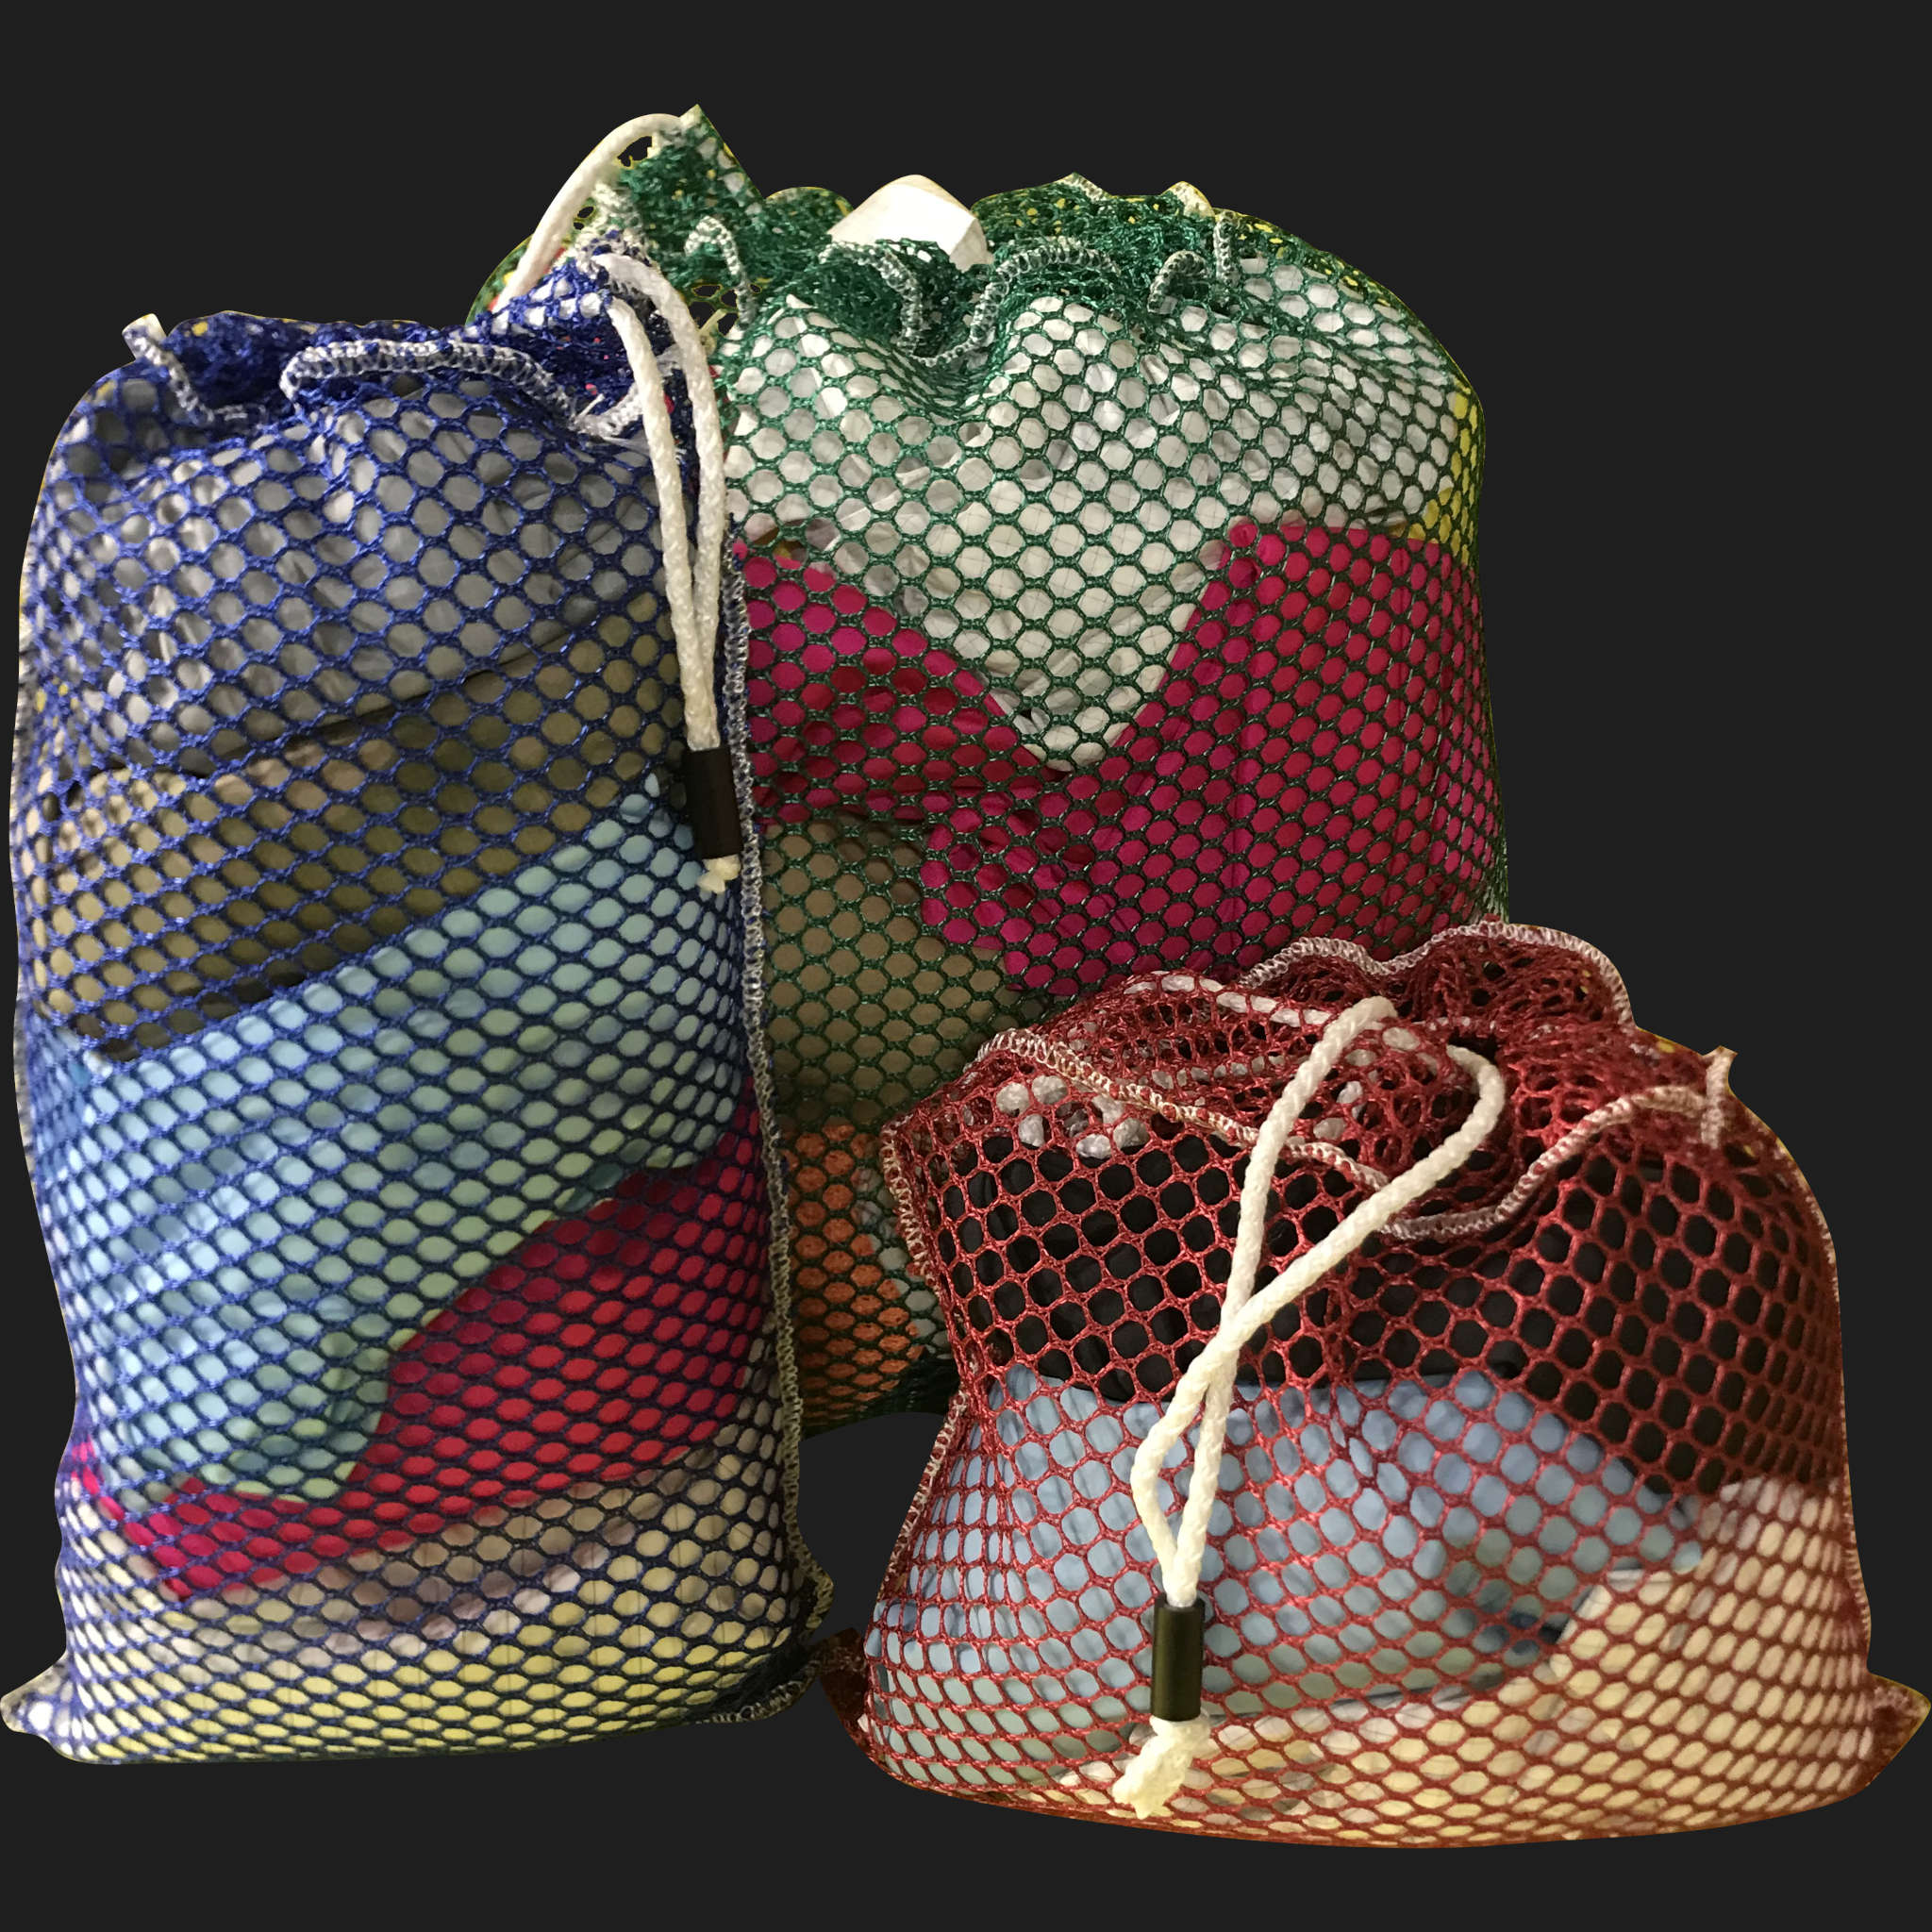 26" x 34" Customized Mesh-Net-Laundry Bags Heavy Duty with Cord and barrellock closure